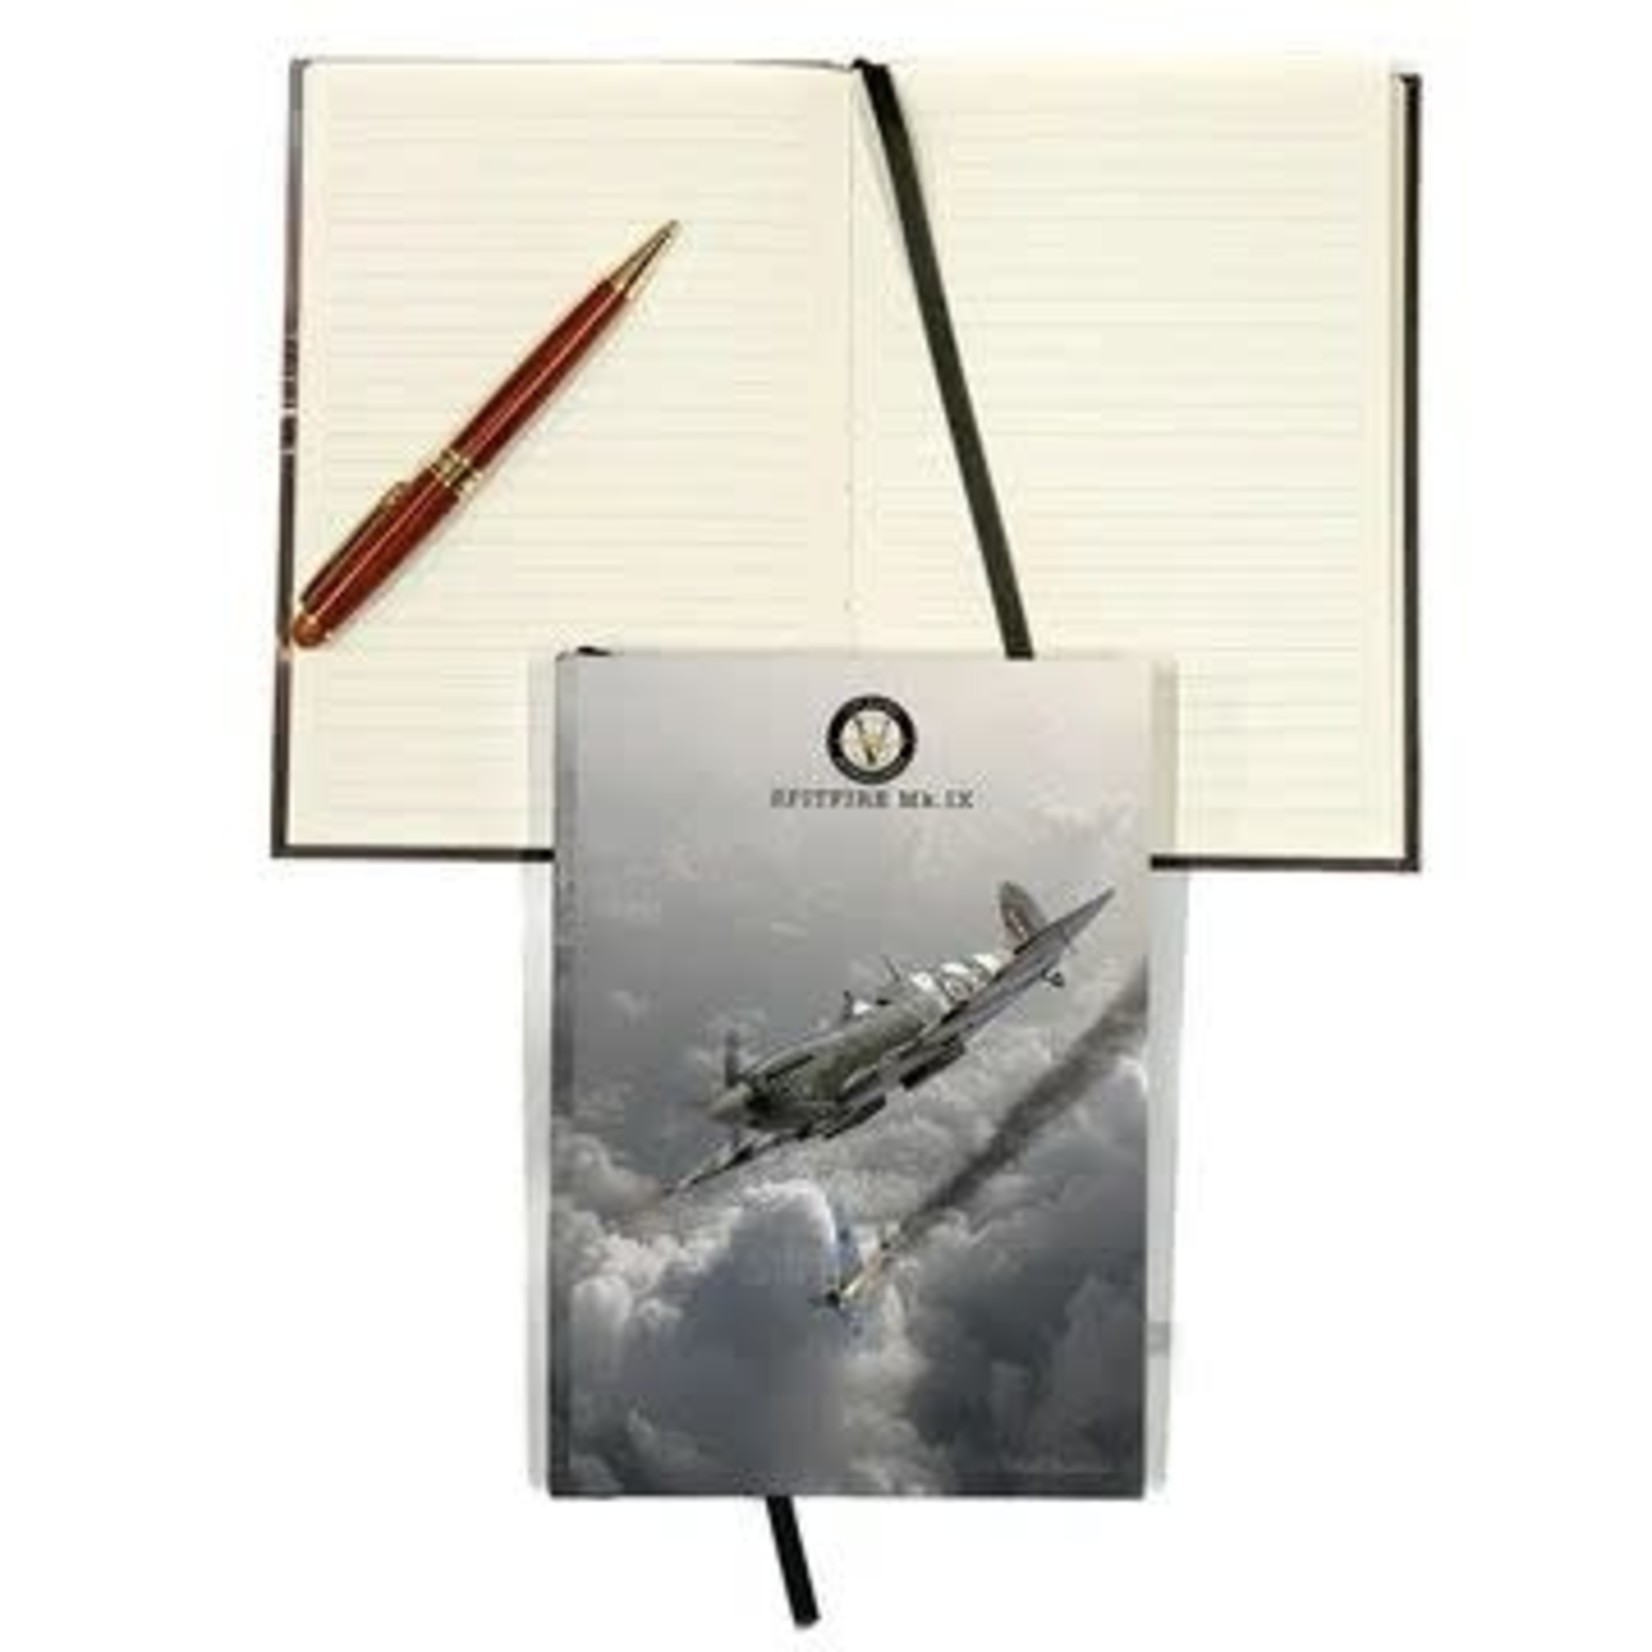 Aviation and Space Journal Spitfire MKIX Hard Cover